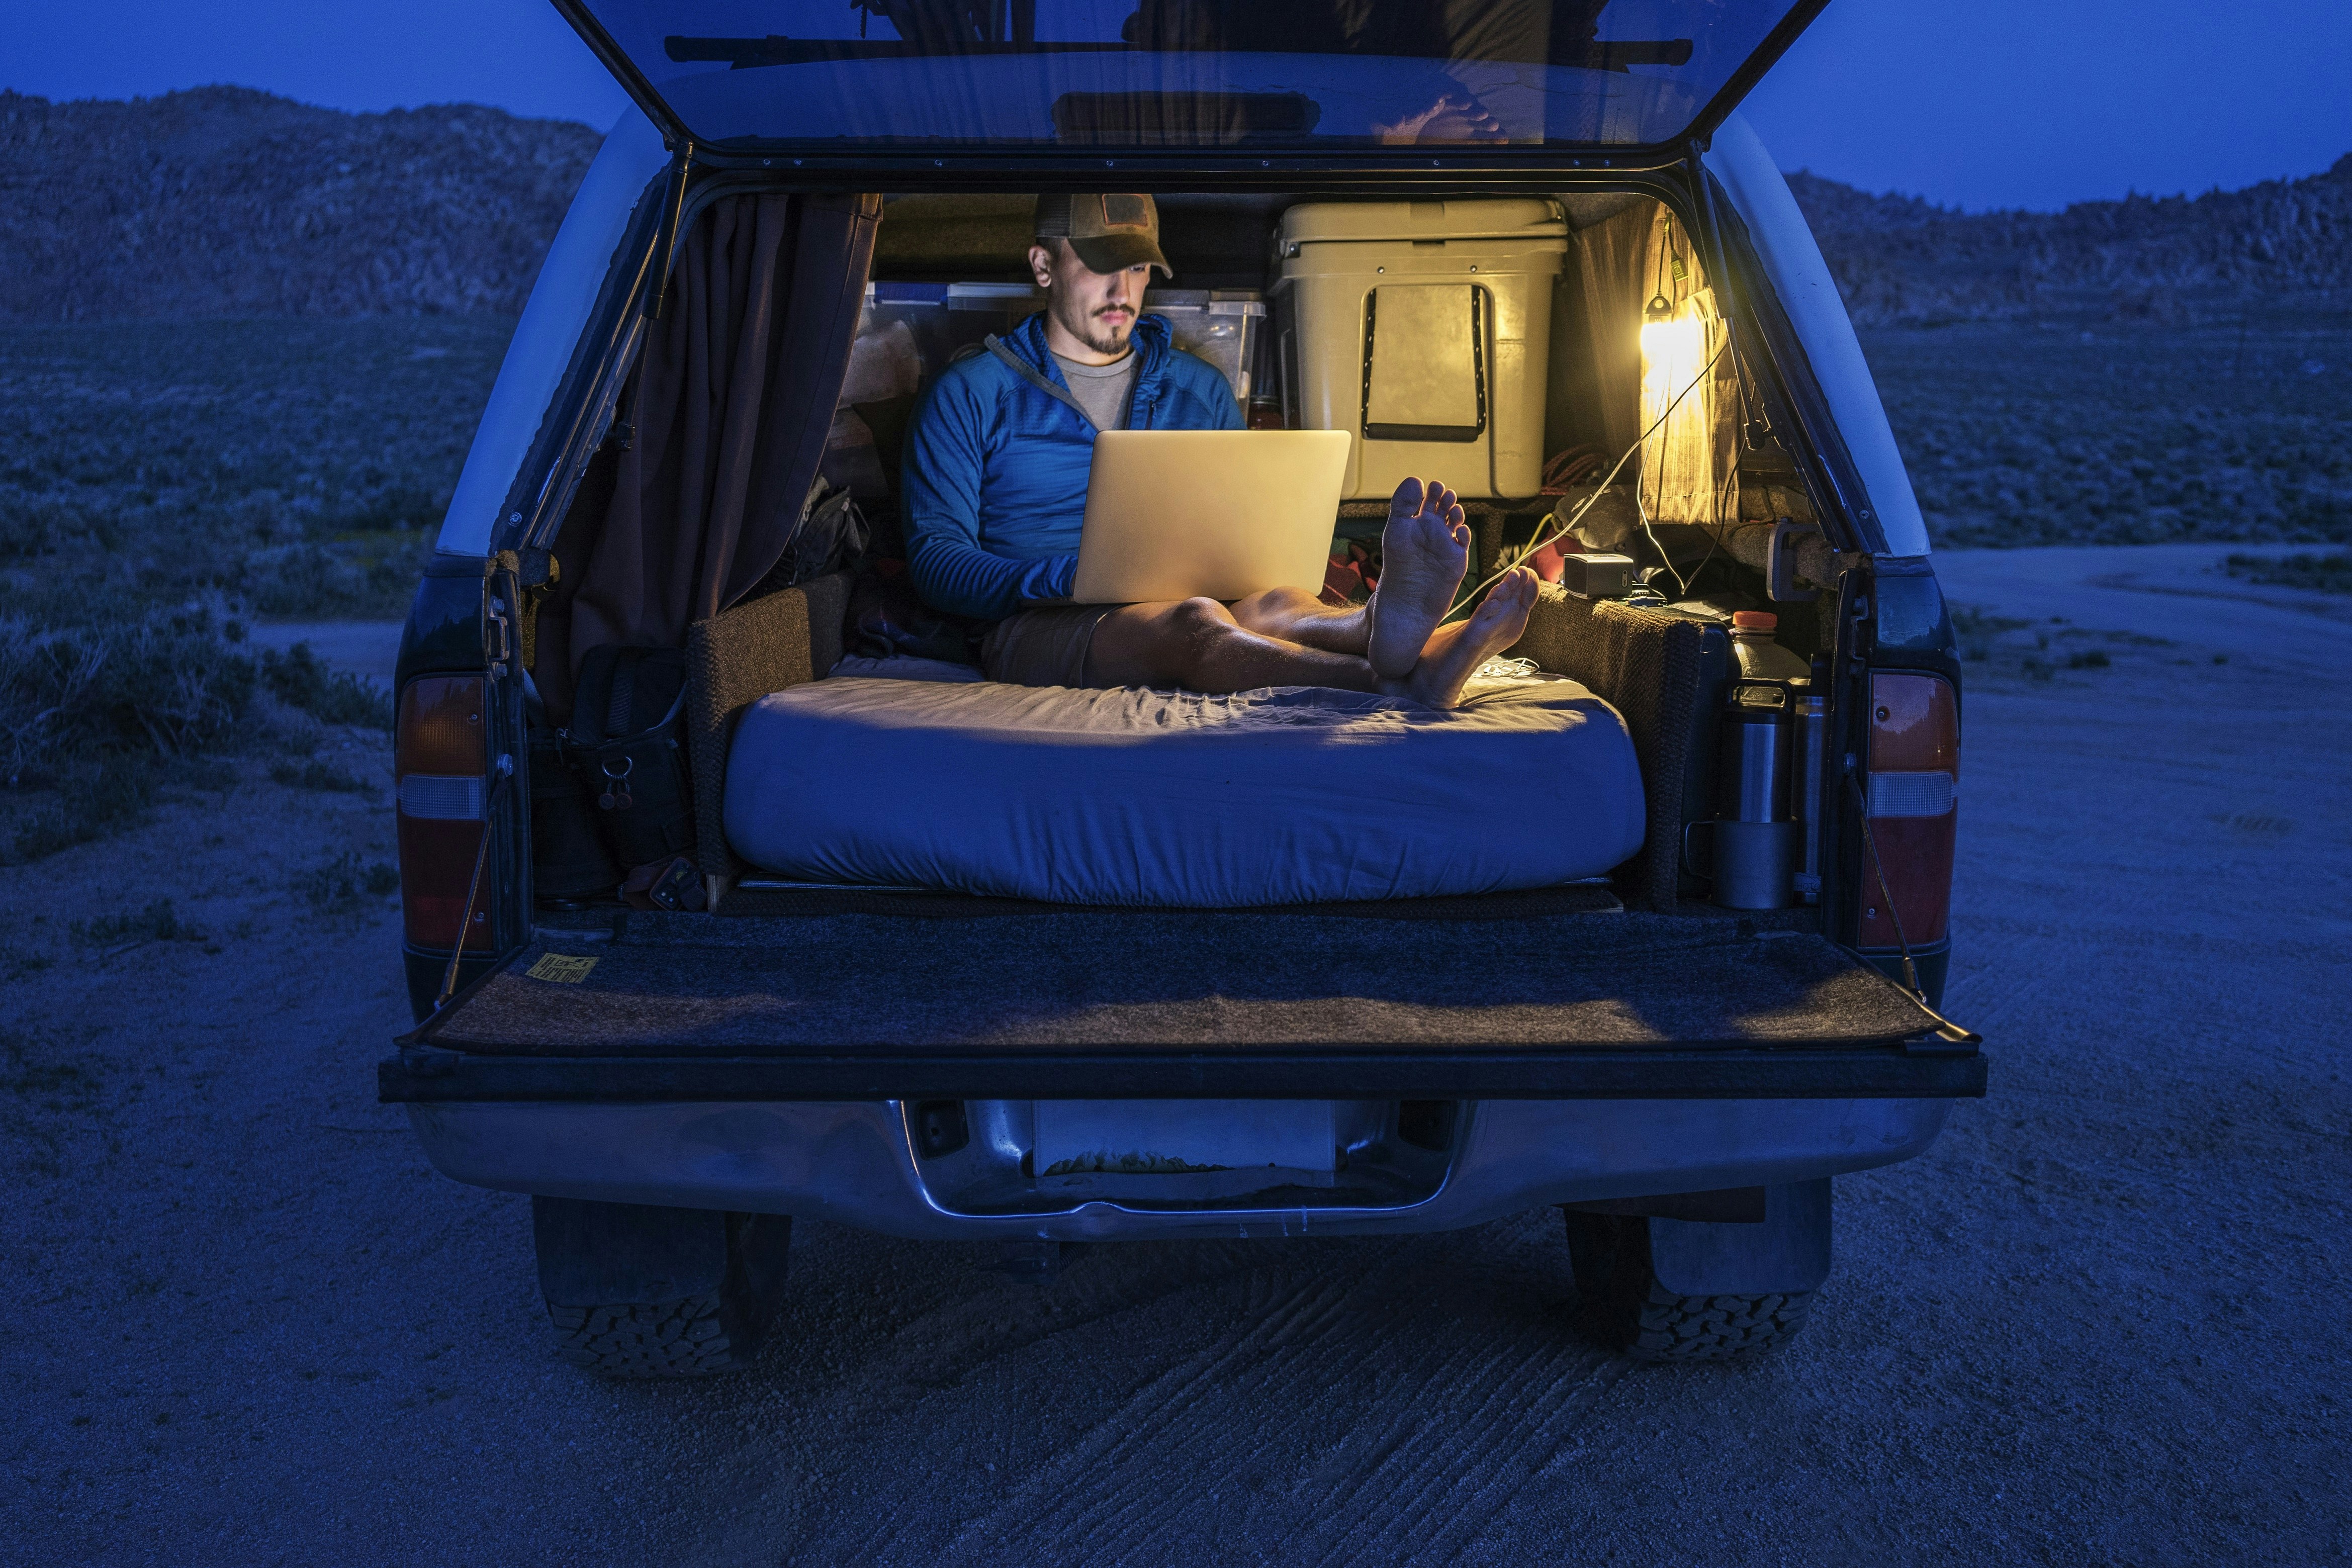 A man works on a laptop while sitting on a mattress in the back of a car at night time.